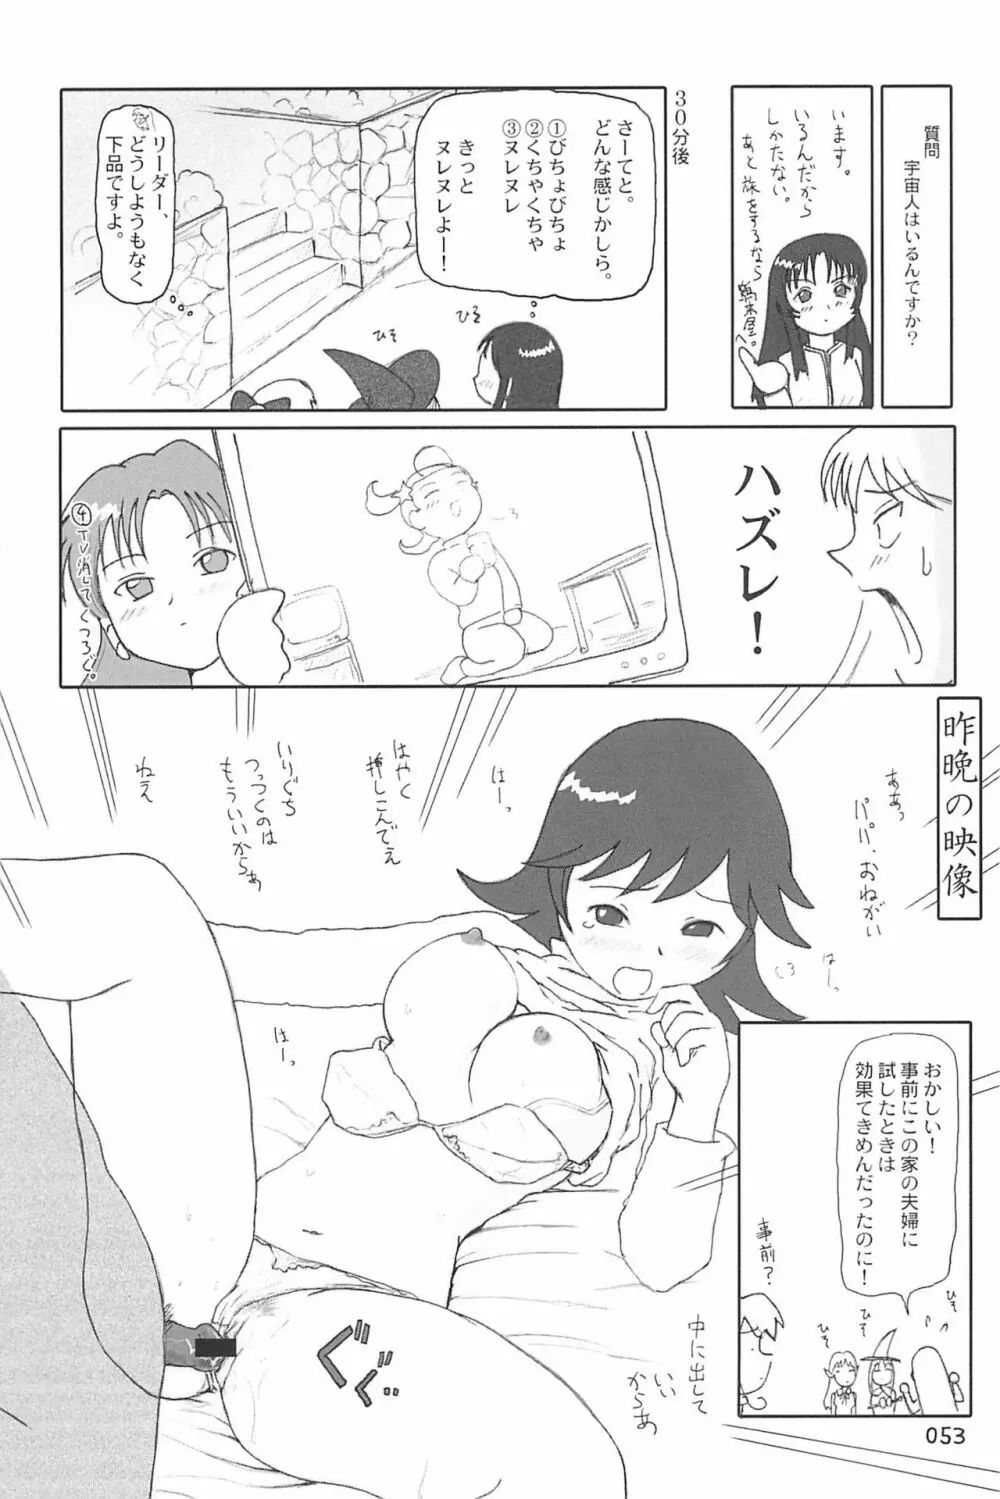 ND-special Volume 4 53ページ